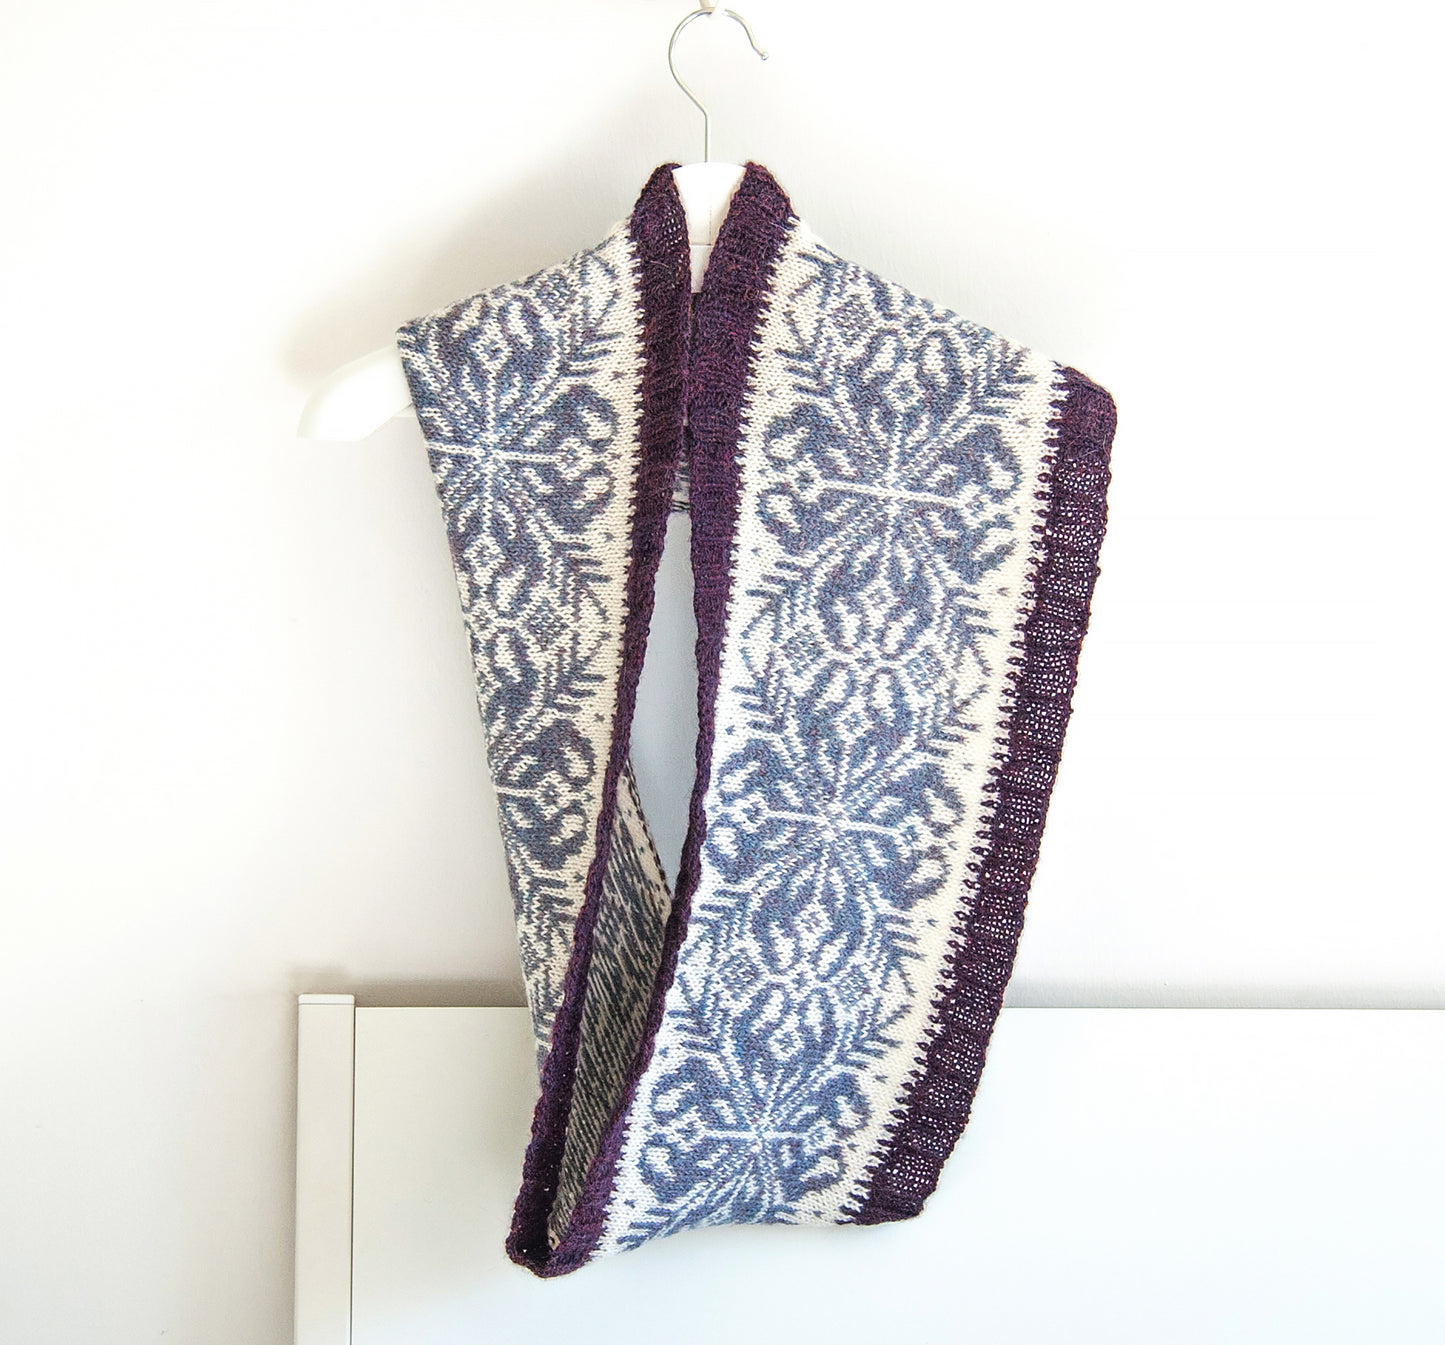 Hand-knitted Fair Isle cowl in Snowflake pattern design